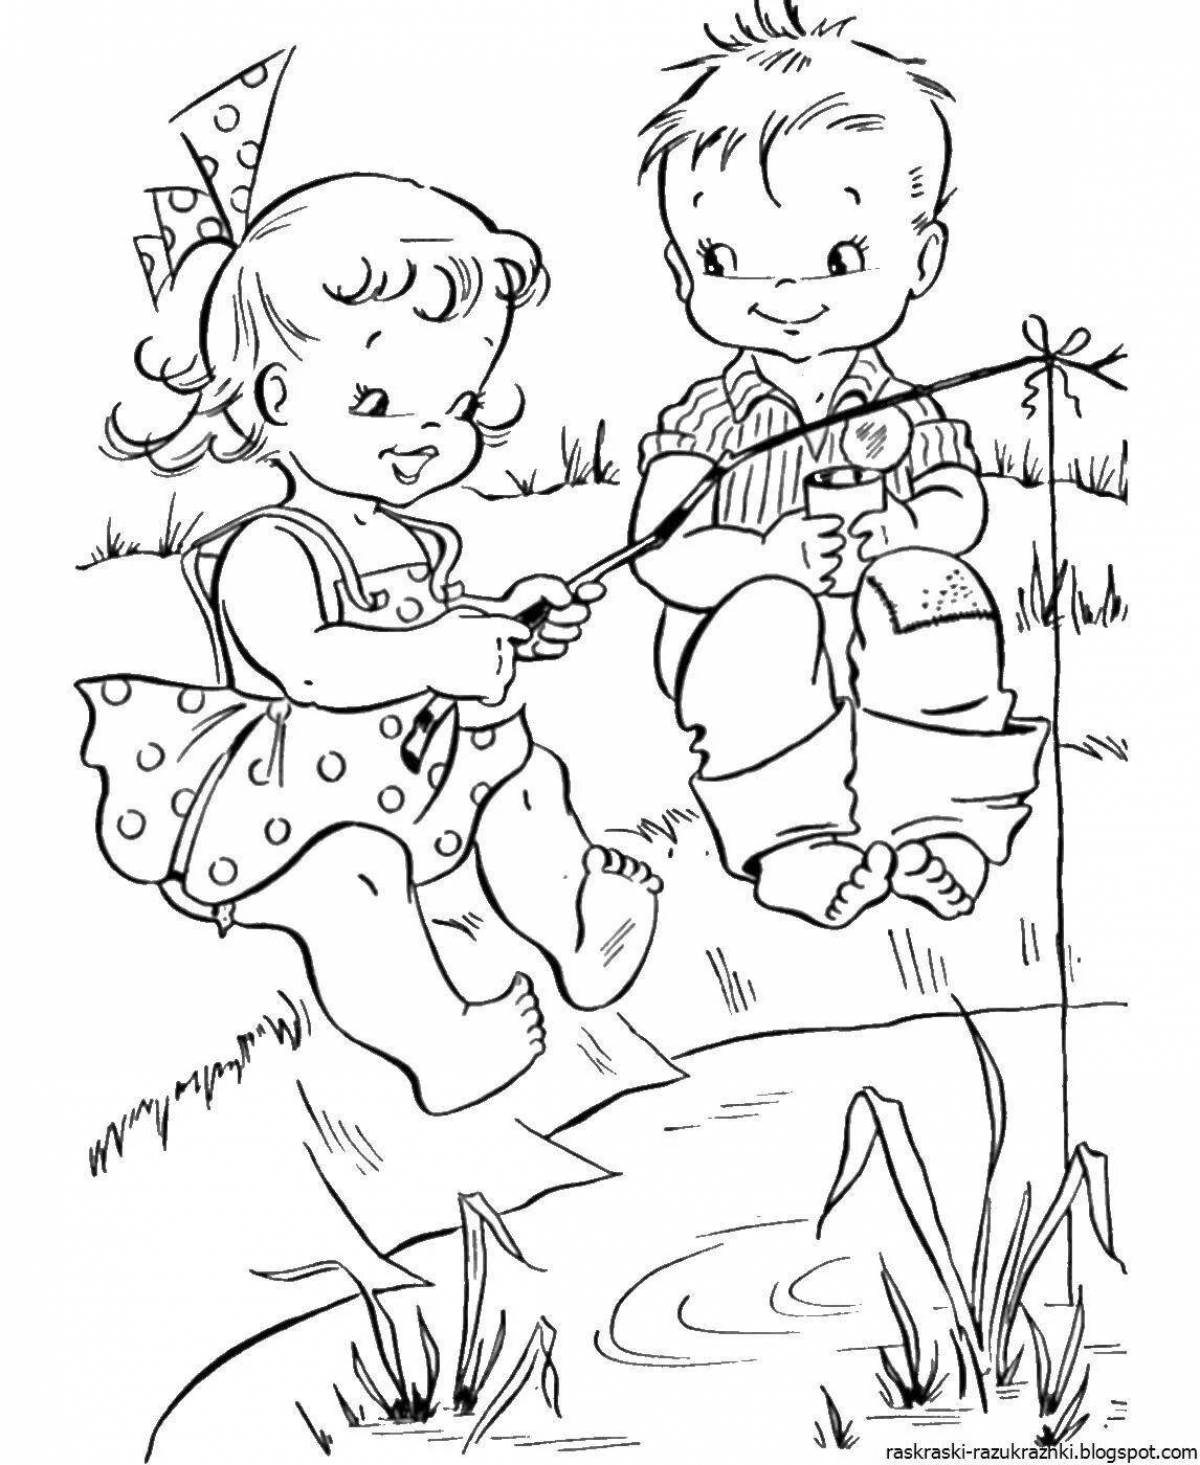 Dragoon childhood friend coloring page